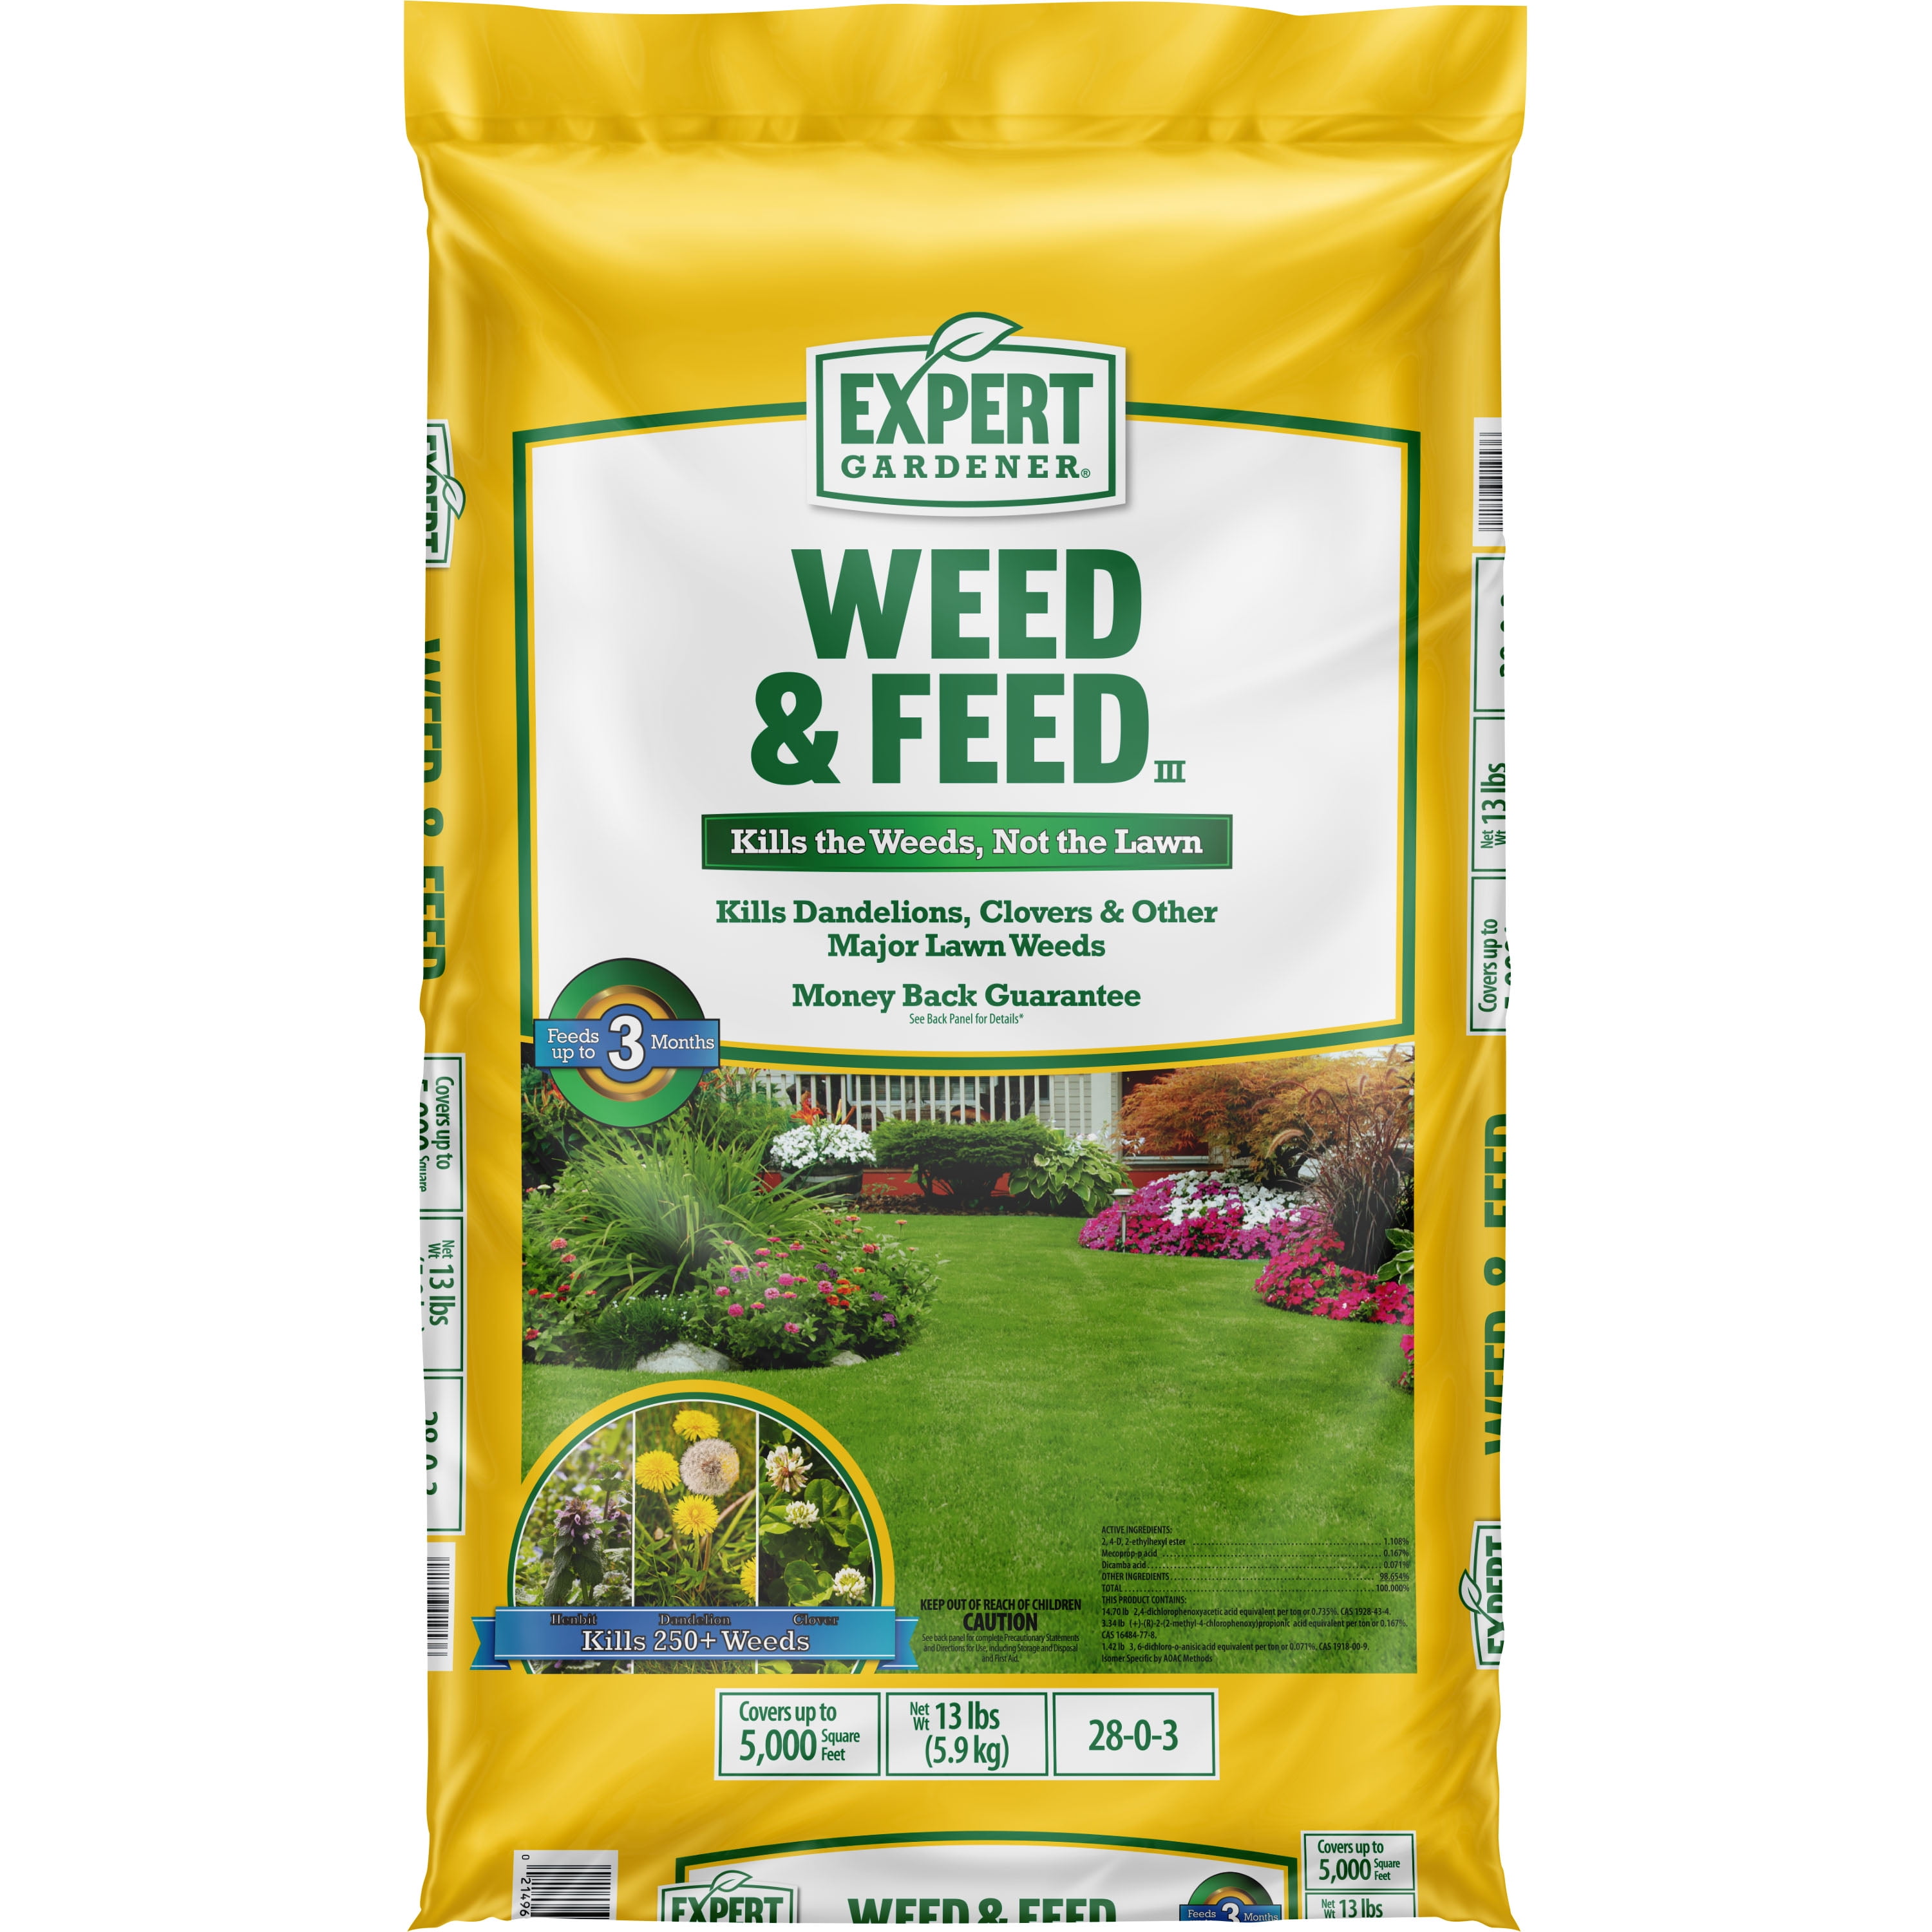 expert gardener weed and feed fertilizer 28-0-3, 13.2 lb. covers